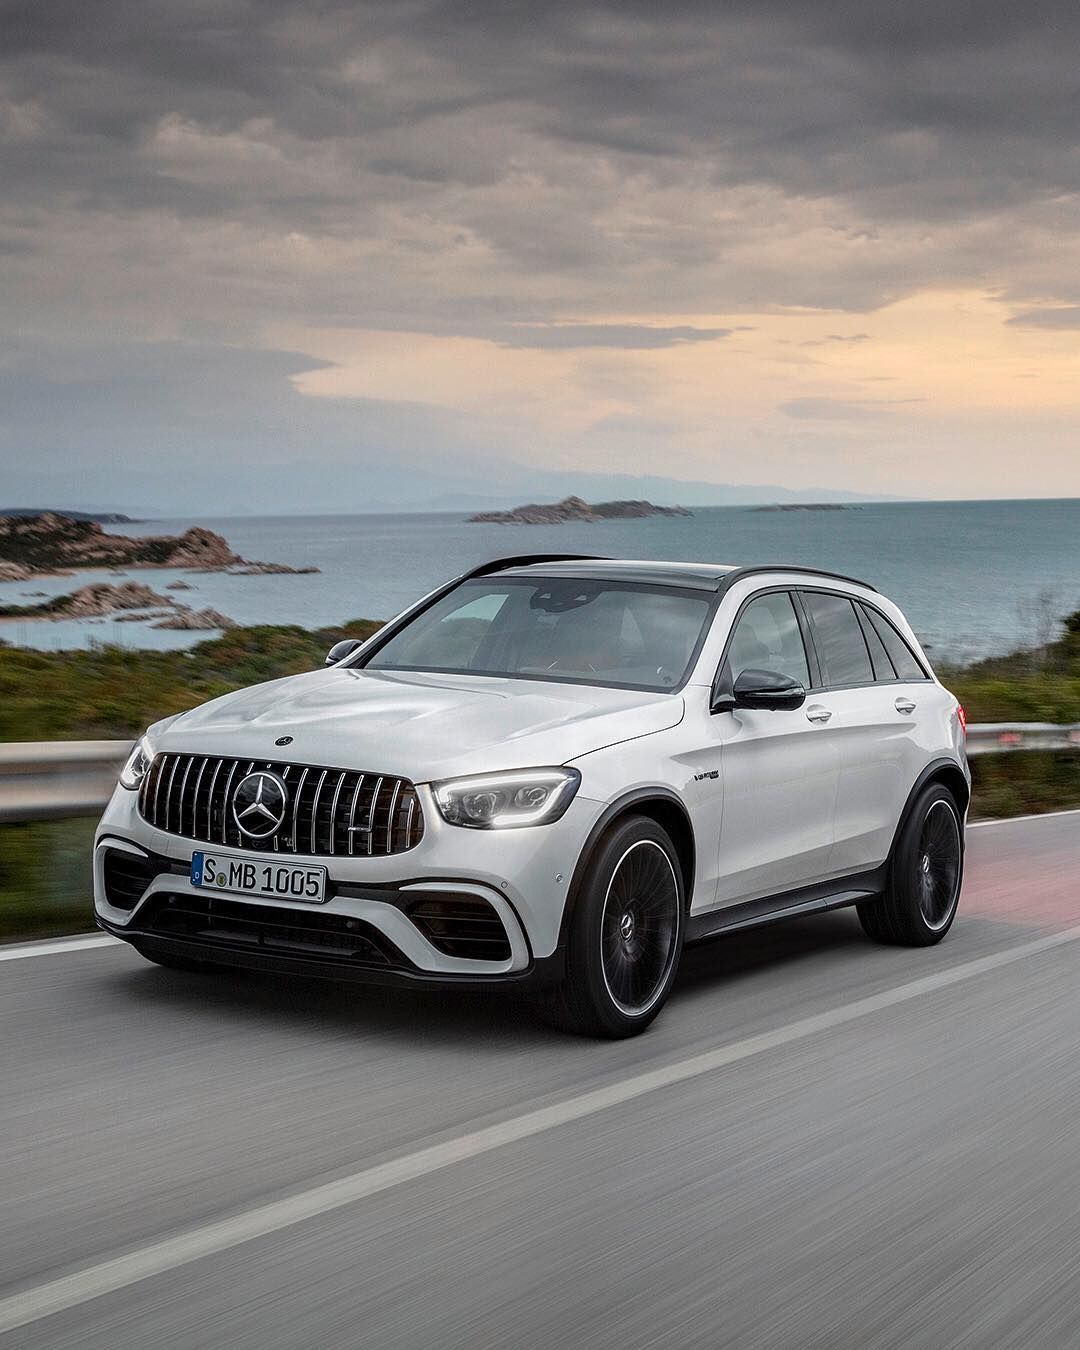 Car and Driver on Instagram: “The #MercedesAMG GLC63 SUV and Coupe are fresher than ever. Mild styling and performance upgrades keep the riotous twin-turbo V-8 compacts…”